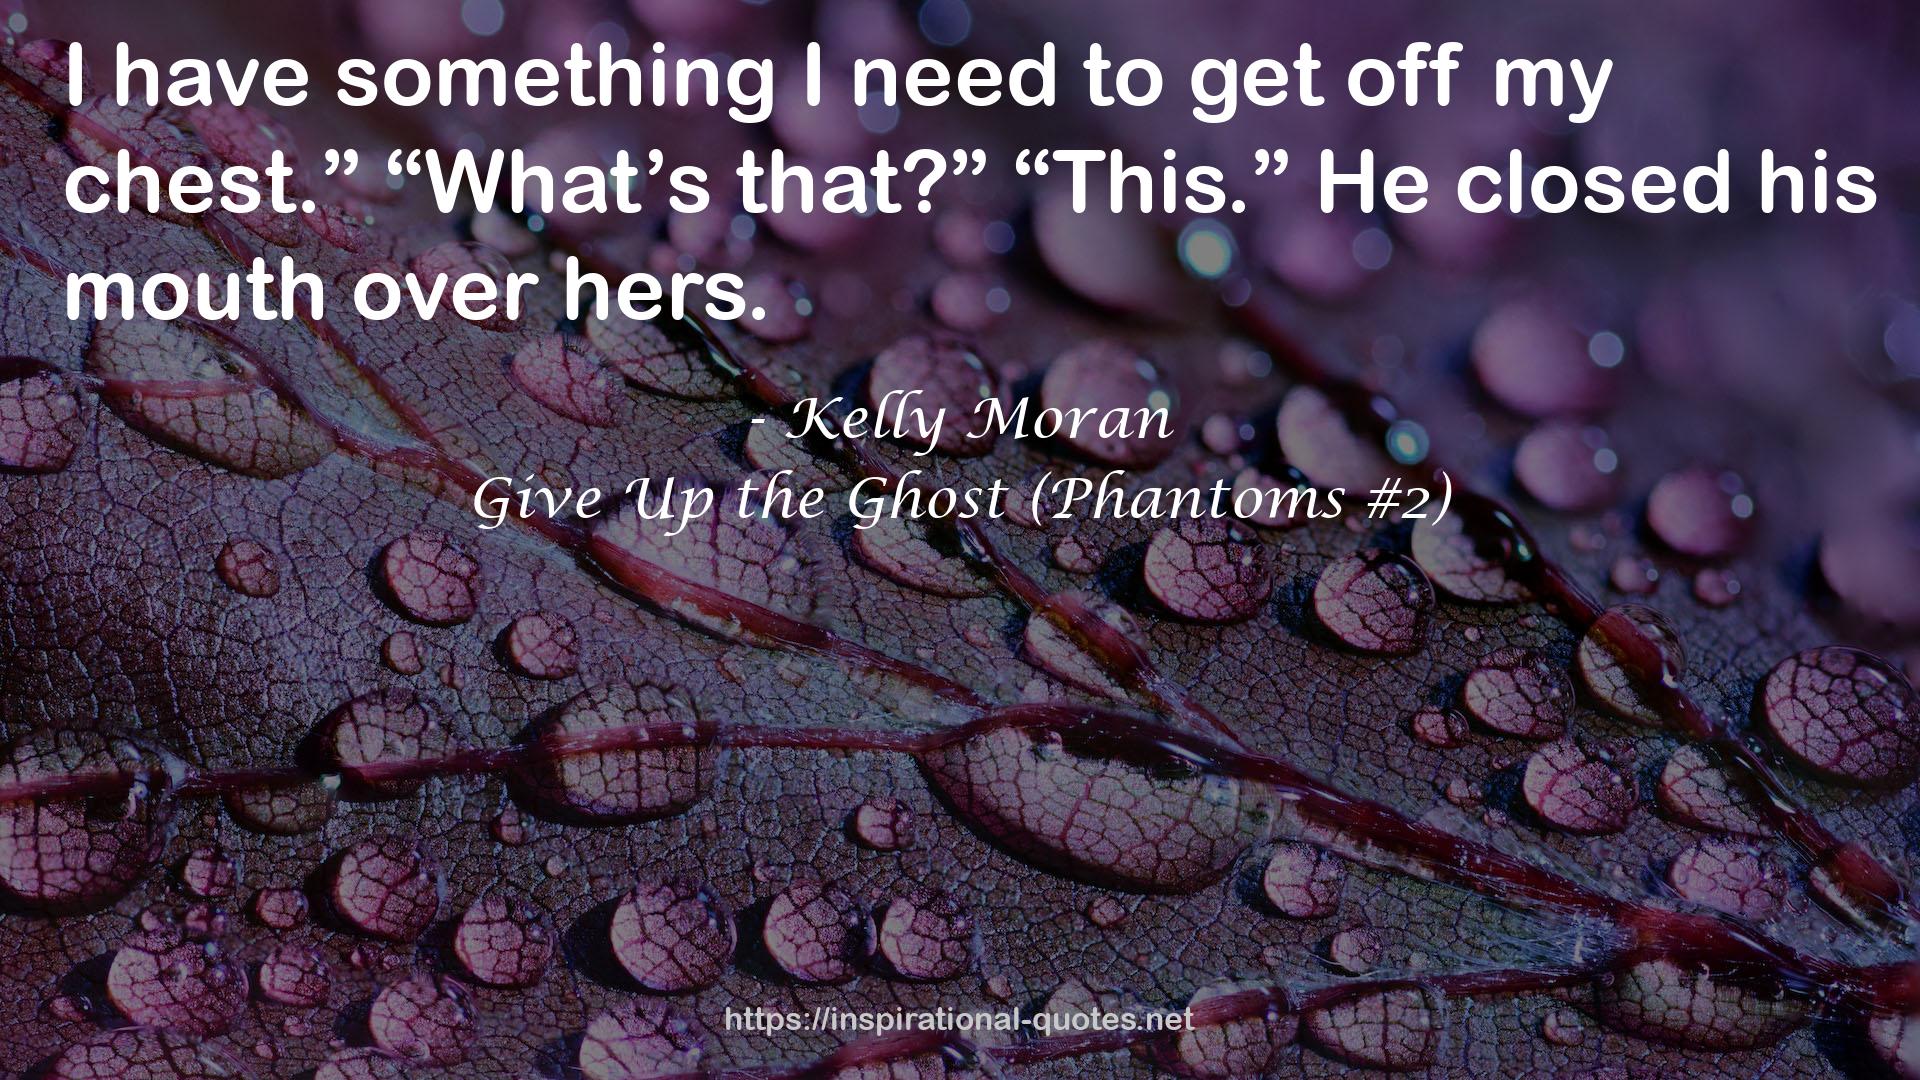 Give Up the Ghost (Phantoms #2) QUOTES